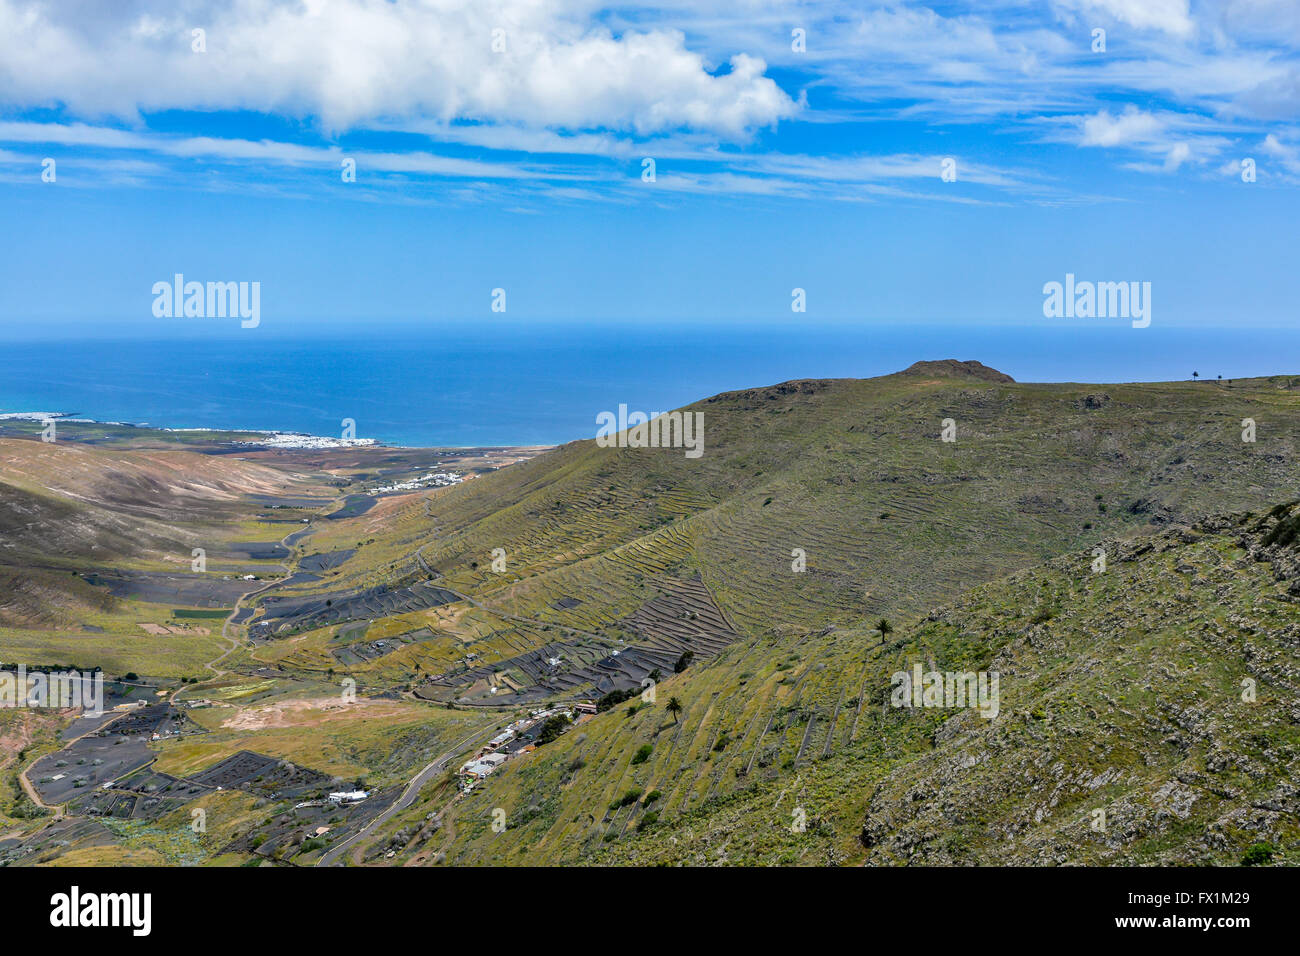 Amazing landscape of Haria valley (the valley of a thousand palms), Lanzarote island, Spain Stock Photo